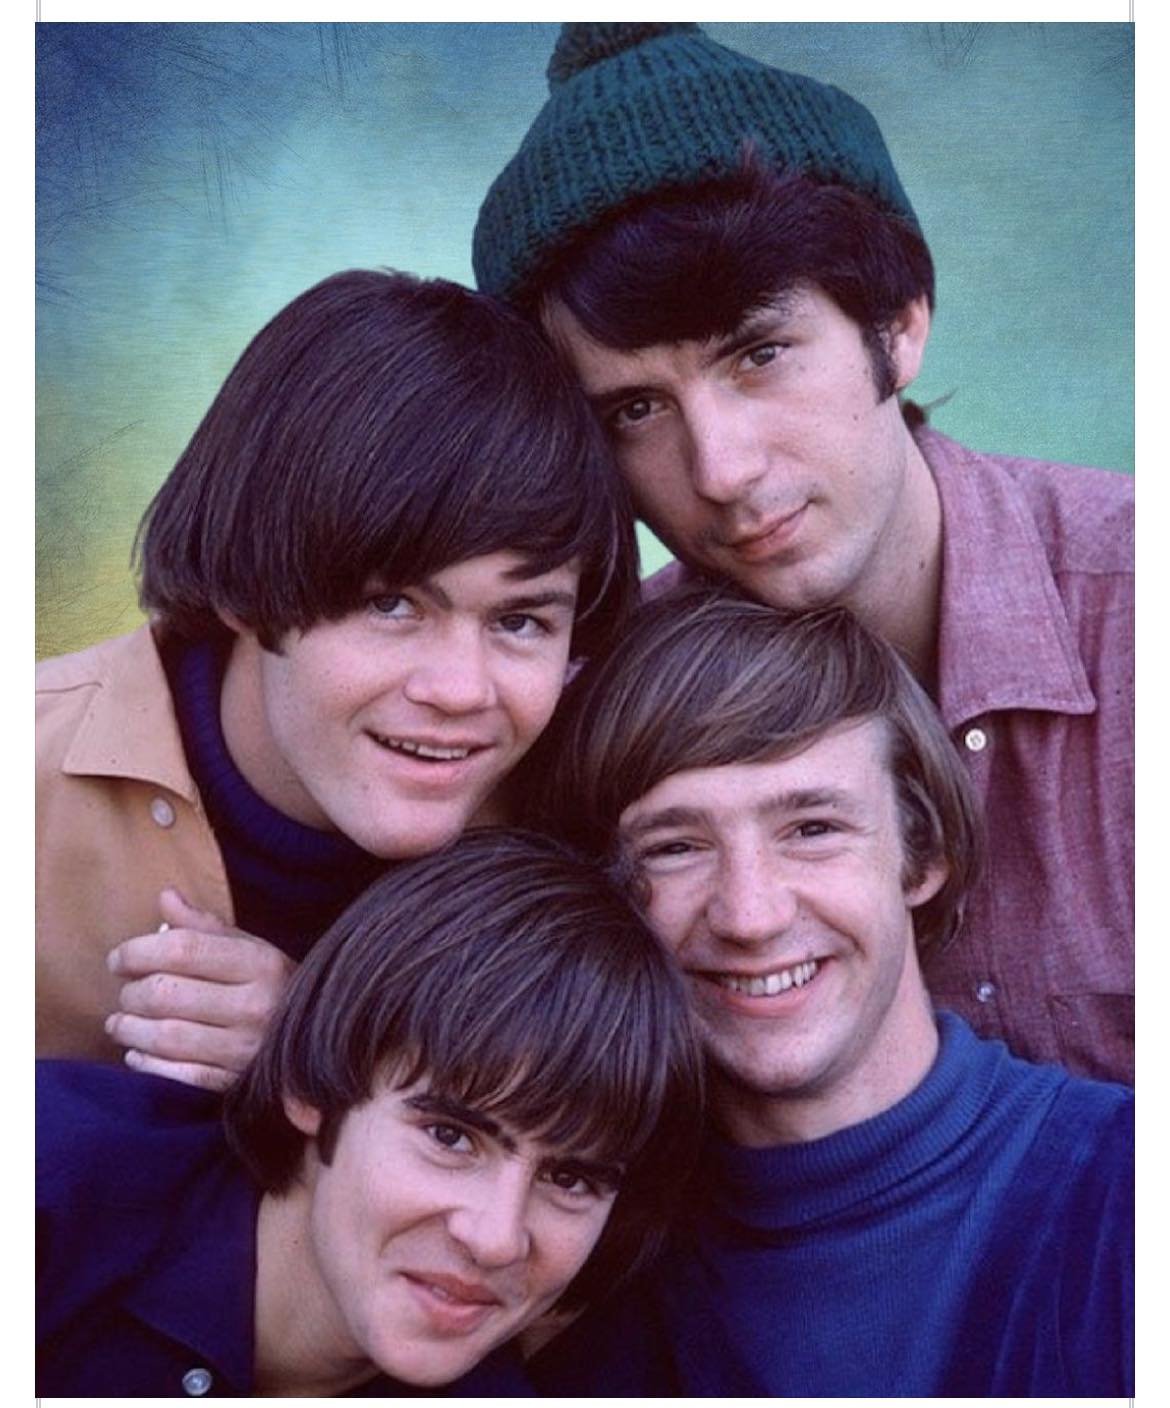 Hey hey, we&rsquo;re the Monkees!  Who thinks we should add a Monkees song to our show?  #southboundcrows #classicrockcovers #monkees #themonkees #nashvilletn #bandfamily #classicrockcoverband #musiccity